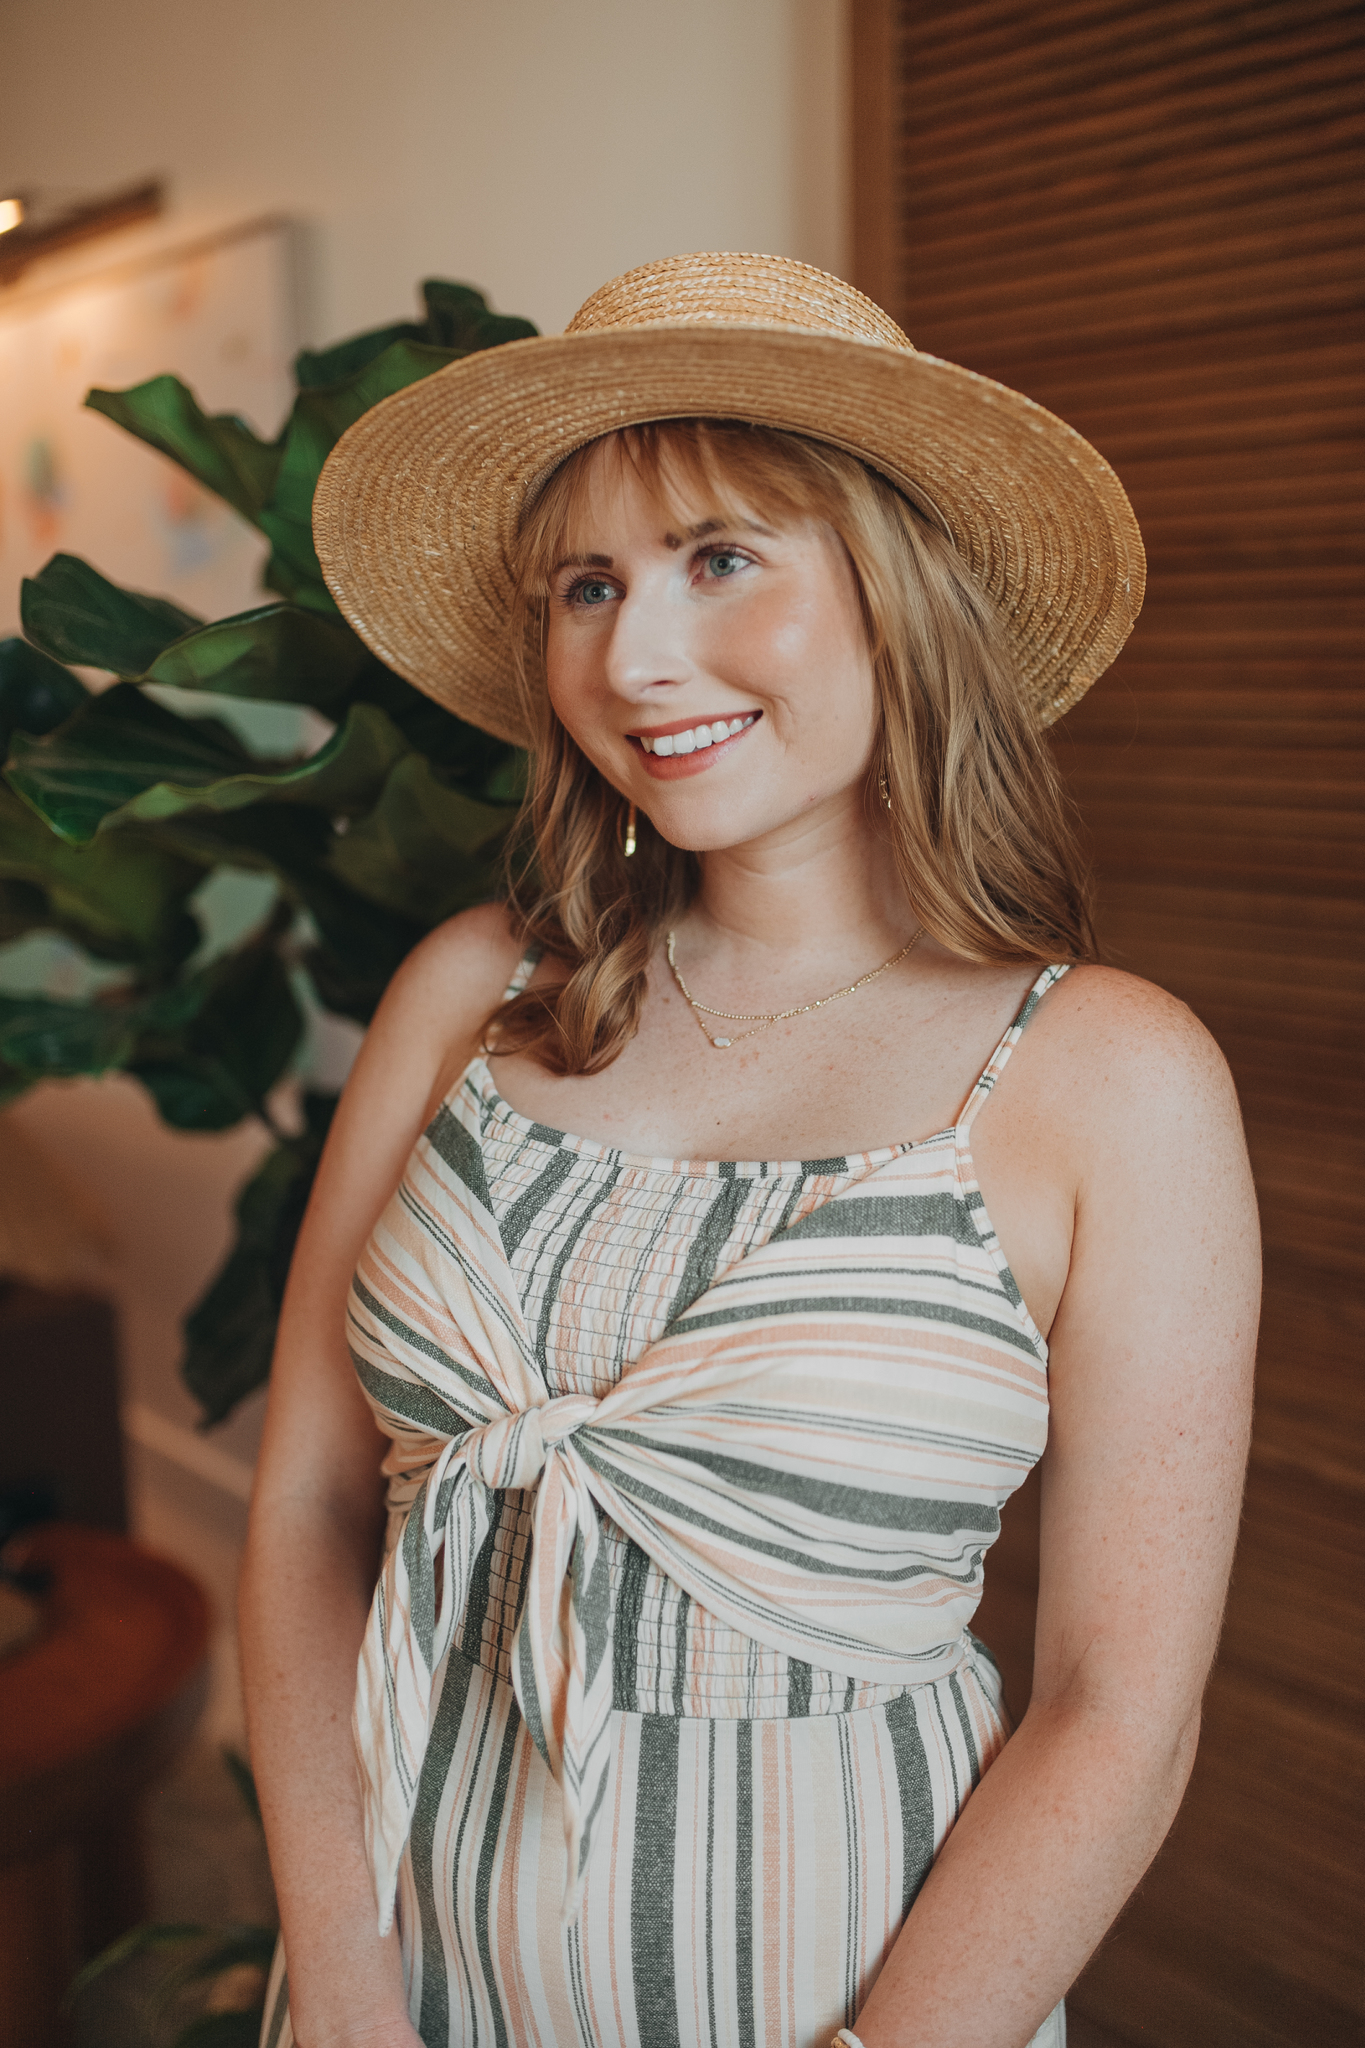 Born This Way Undetectable Medium-to-Full Coverage Foundation - Affordable by Amanda shares her top picks for high end makeup products that are worth the splurge. Amanda Burrows wears a straw hat, green and pink striped jumpsuit.